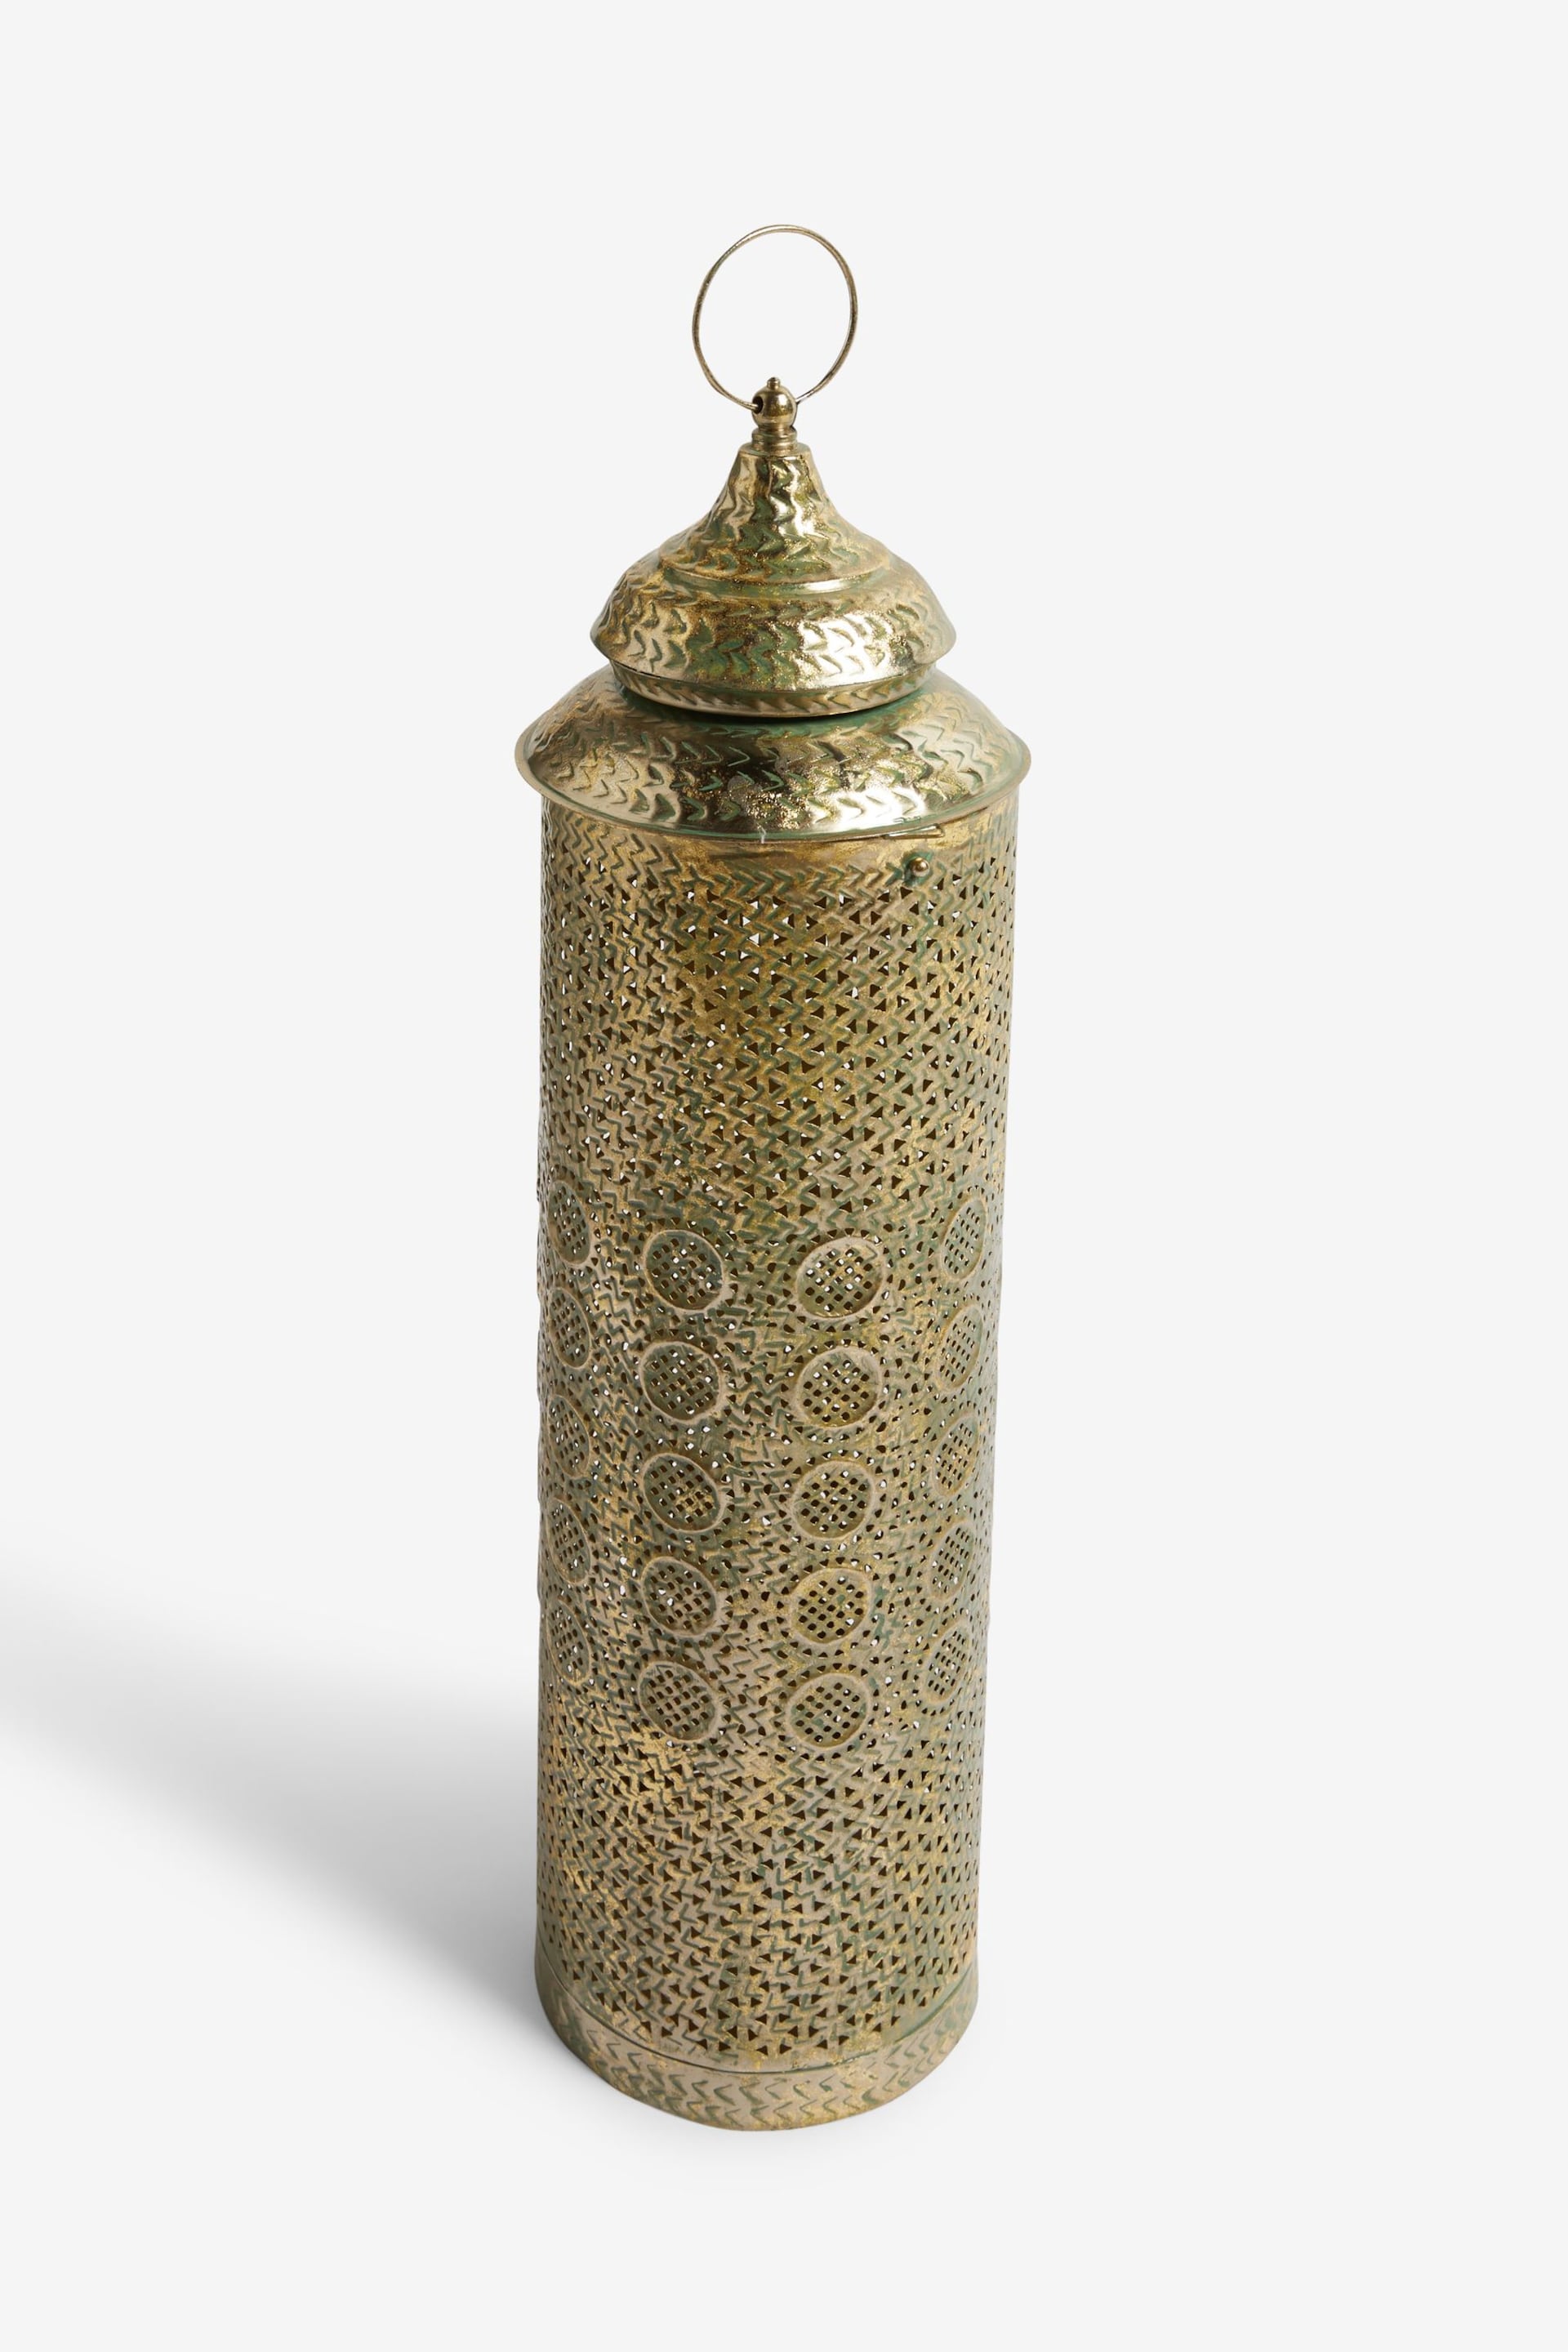 Gold XL Patterned Cutout Metal Lantern Candle Holder - Image 5 of 5